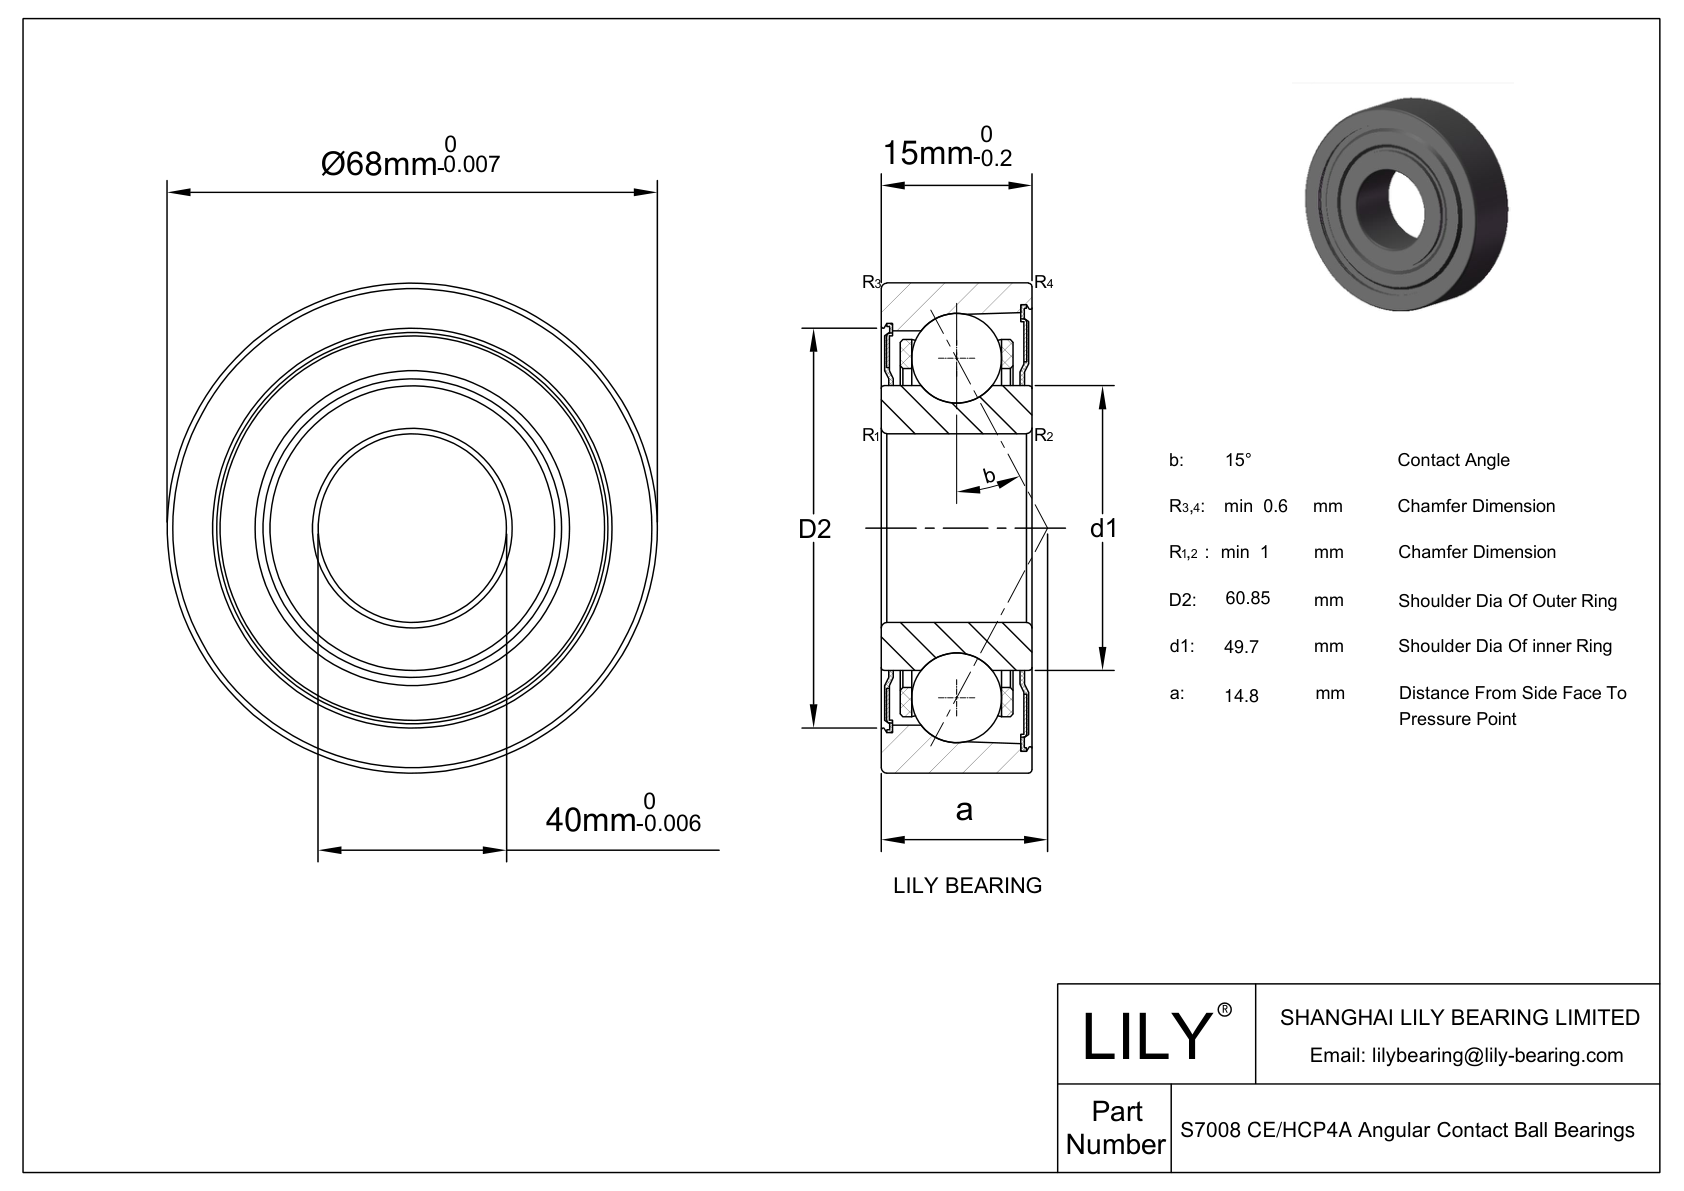 S7008 CE/HCP4A Super Precision Angular Contact Ball Bearings cad drawing